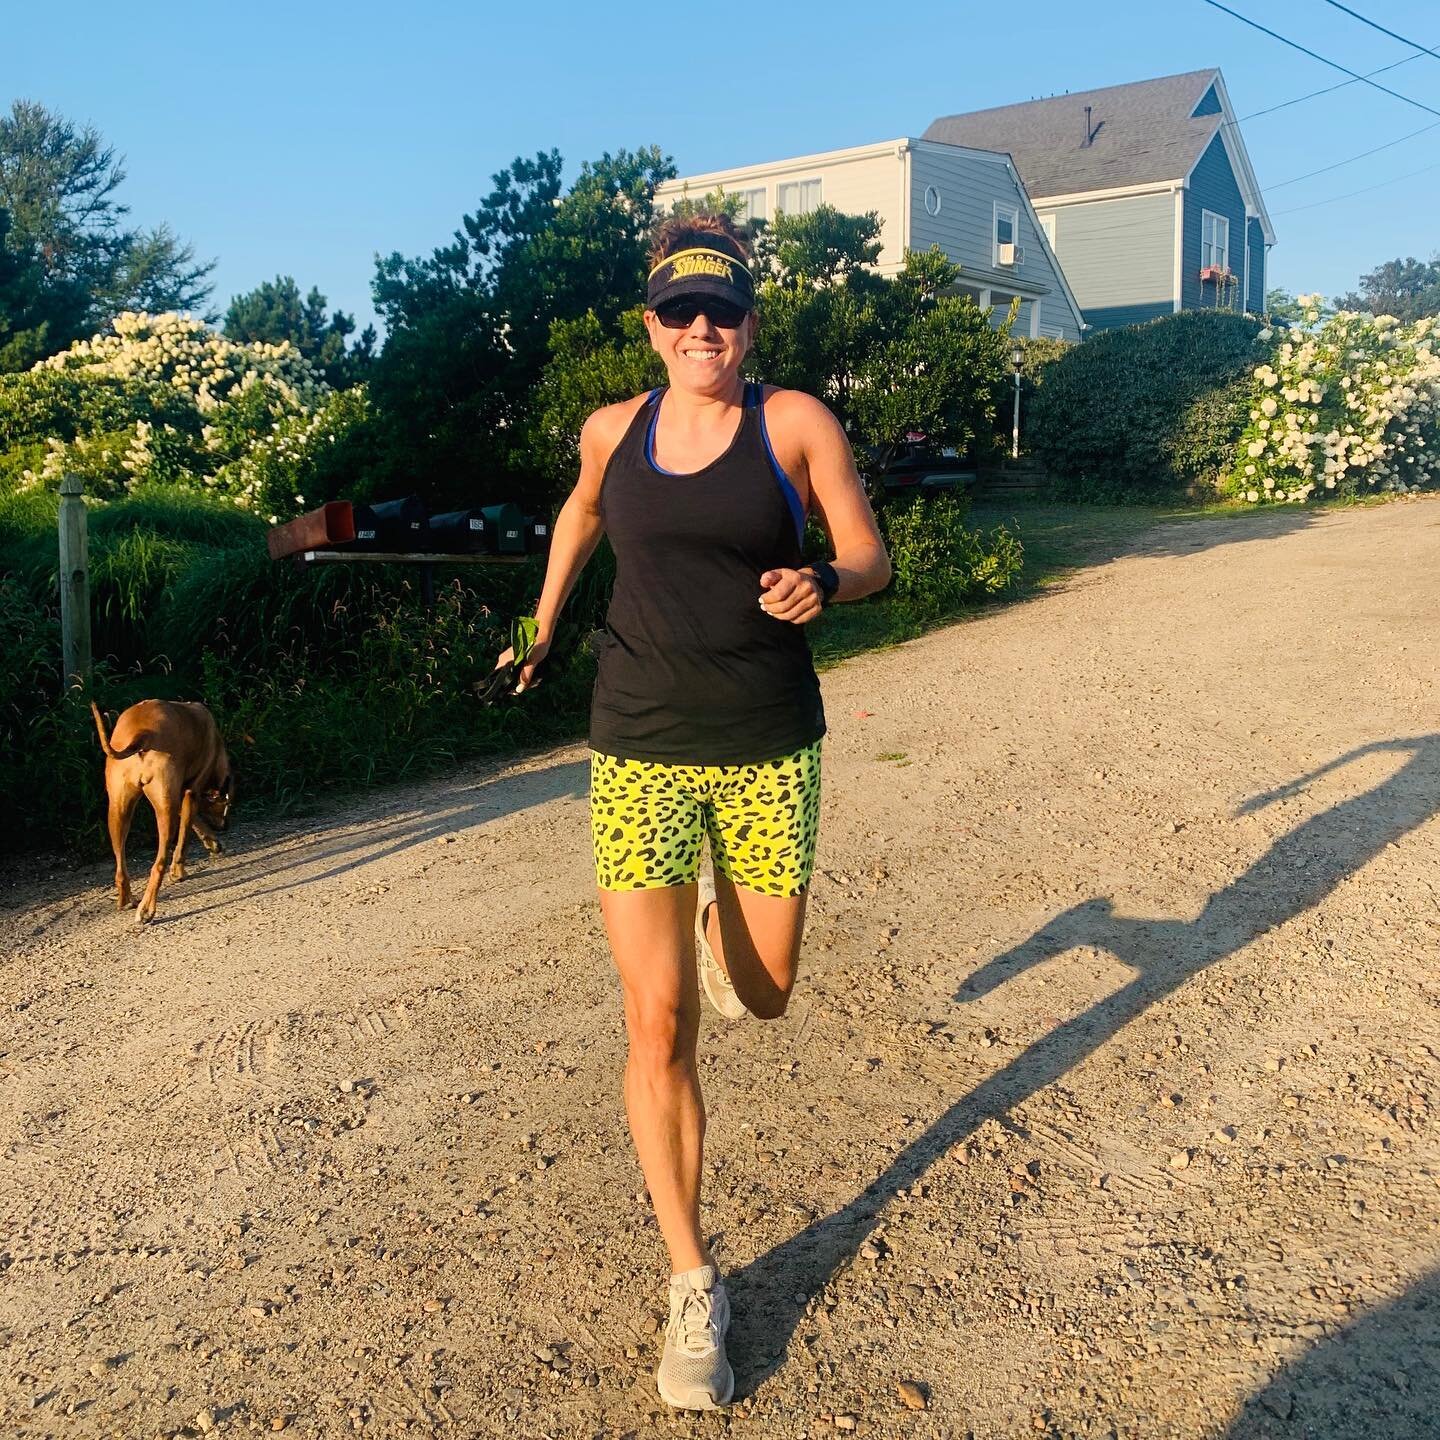 Beach house week came to an end today. Great week with family and sunny 😎 days. I took 4 days off for my shin 2 weeks ago. I was back running for 9 days before the pain came back ☹️ Going up stairs, while sitting and walking. I haven&rsquo;t run sin